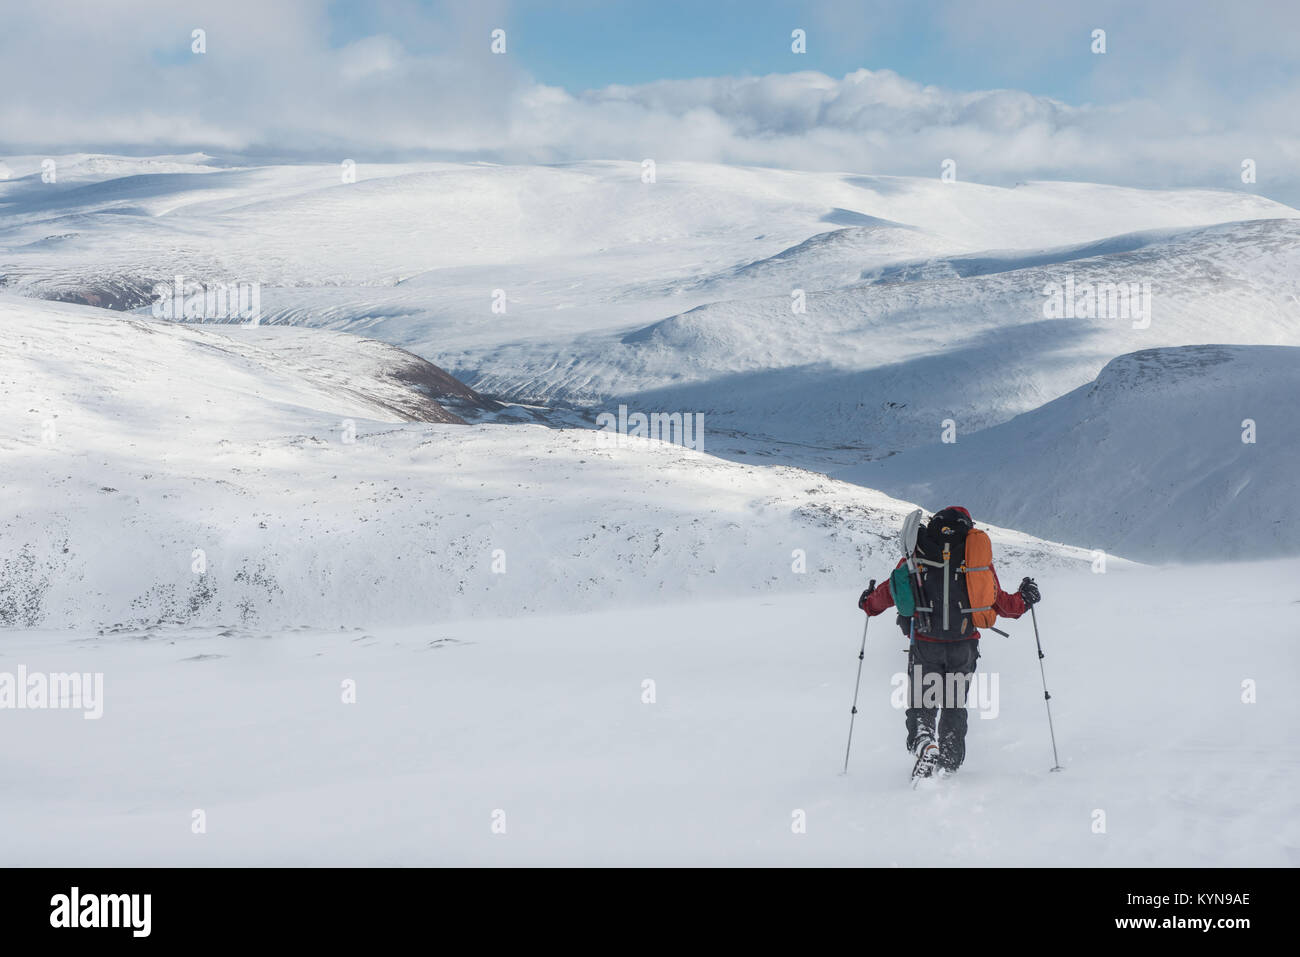 Looking east from Cairn Gorm mountain across the wilderness of the snow covered Cairngorm mountain range Stock Photo